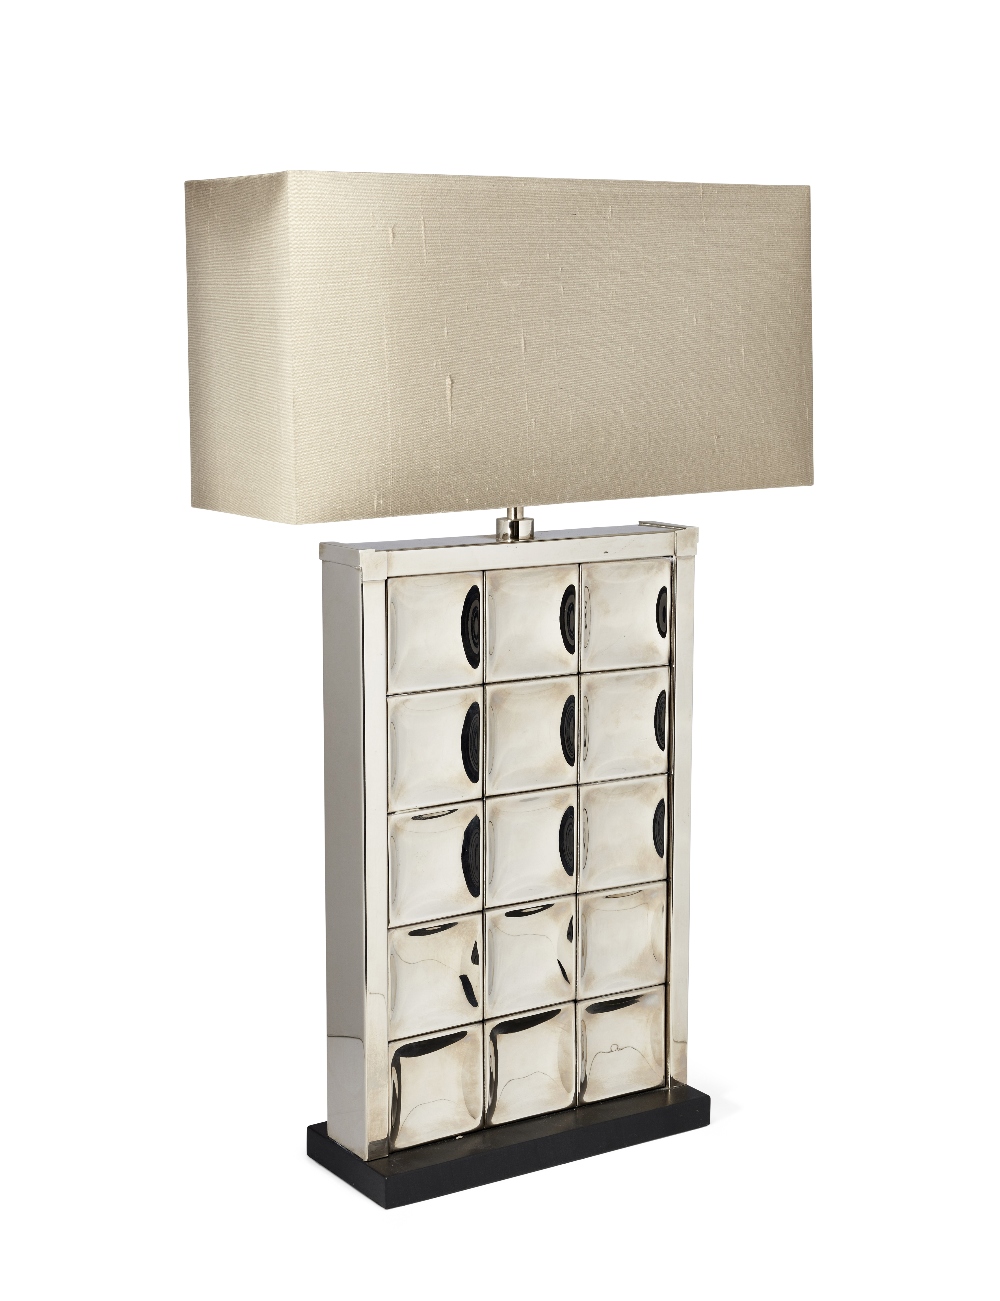 Porta Romana, Contemporary table lamp, circa 2010, Chromed and lacquered metal, fabric shade, 55cm